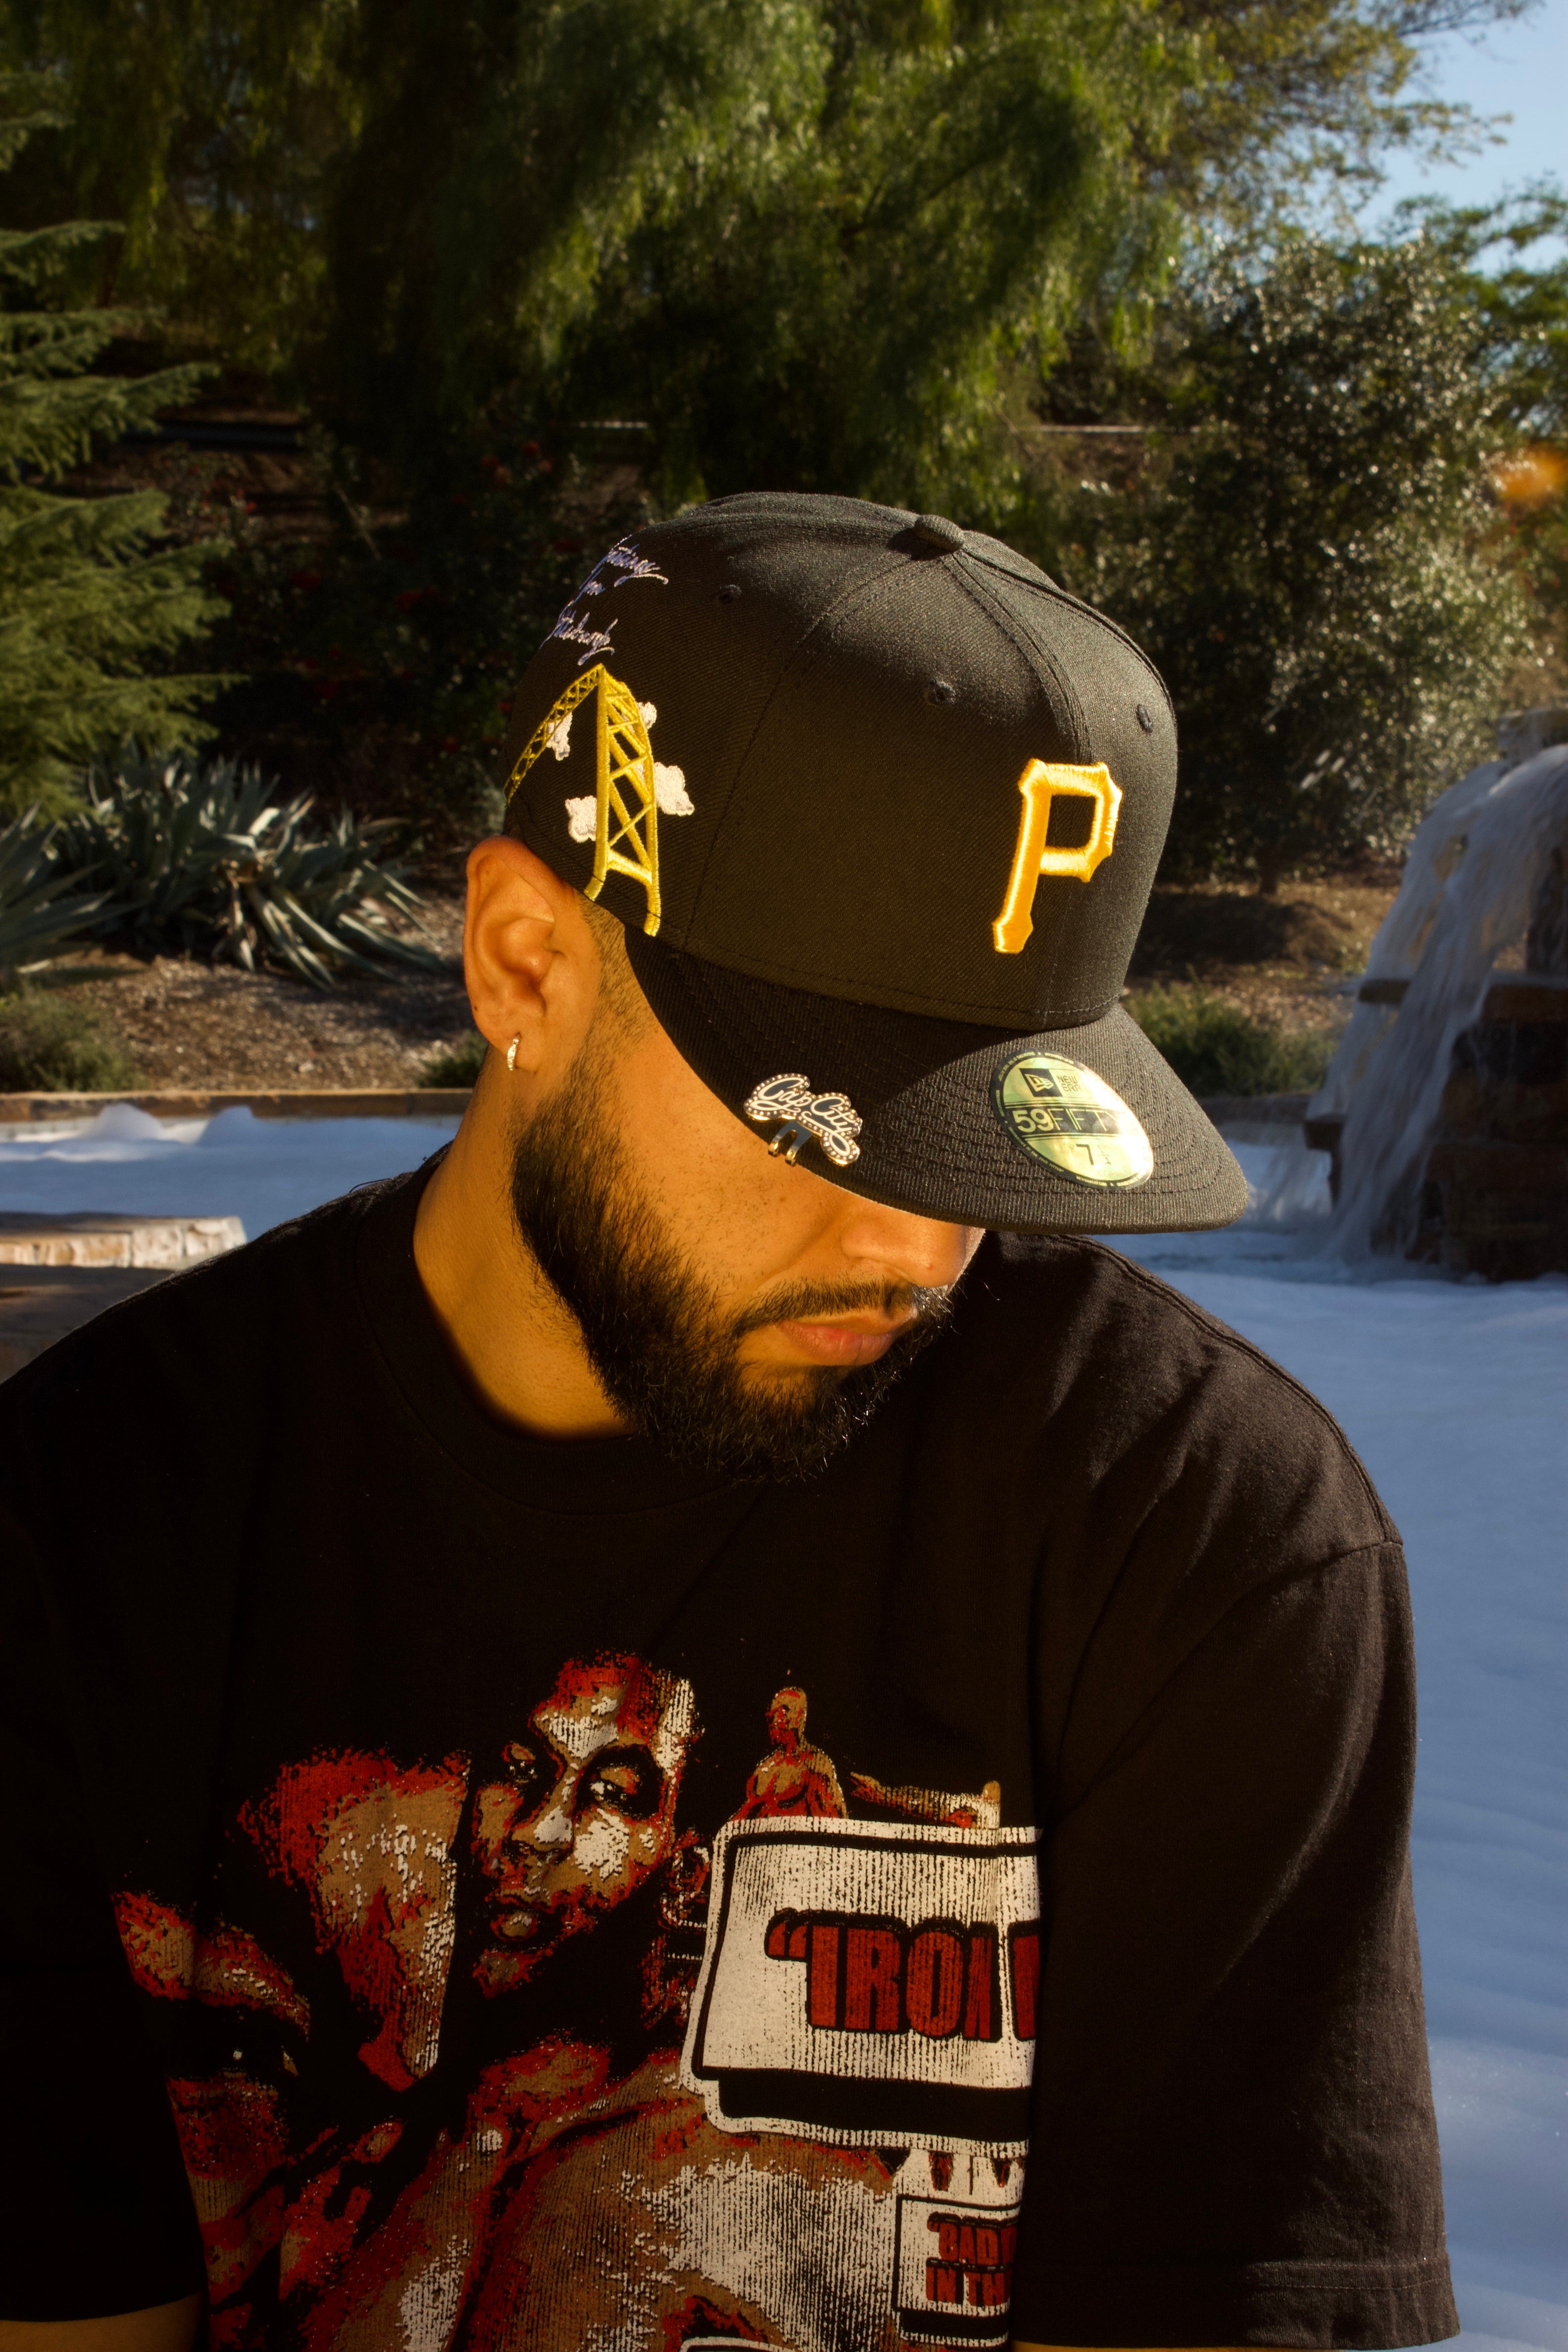 NEW ERA EXCLUSIVE 59FIFTY BLACK PITTSBURGH PIRATES W/ "GREETINGS FROM PITTSBURGH" PATCH